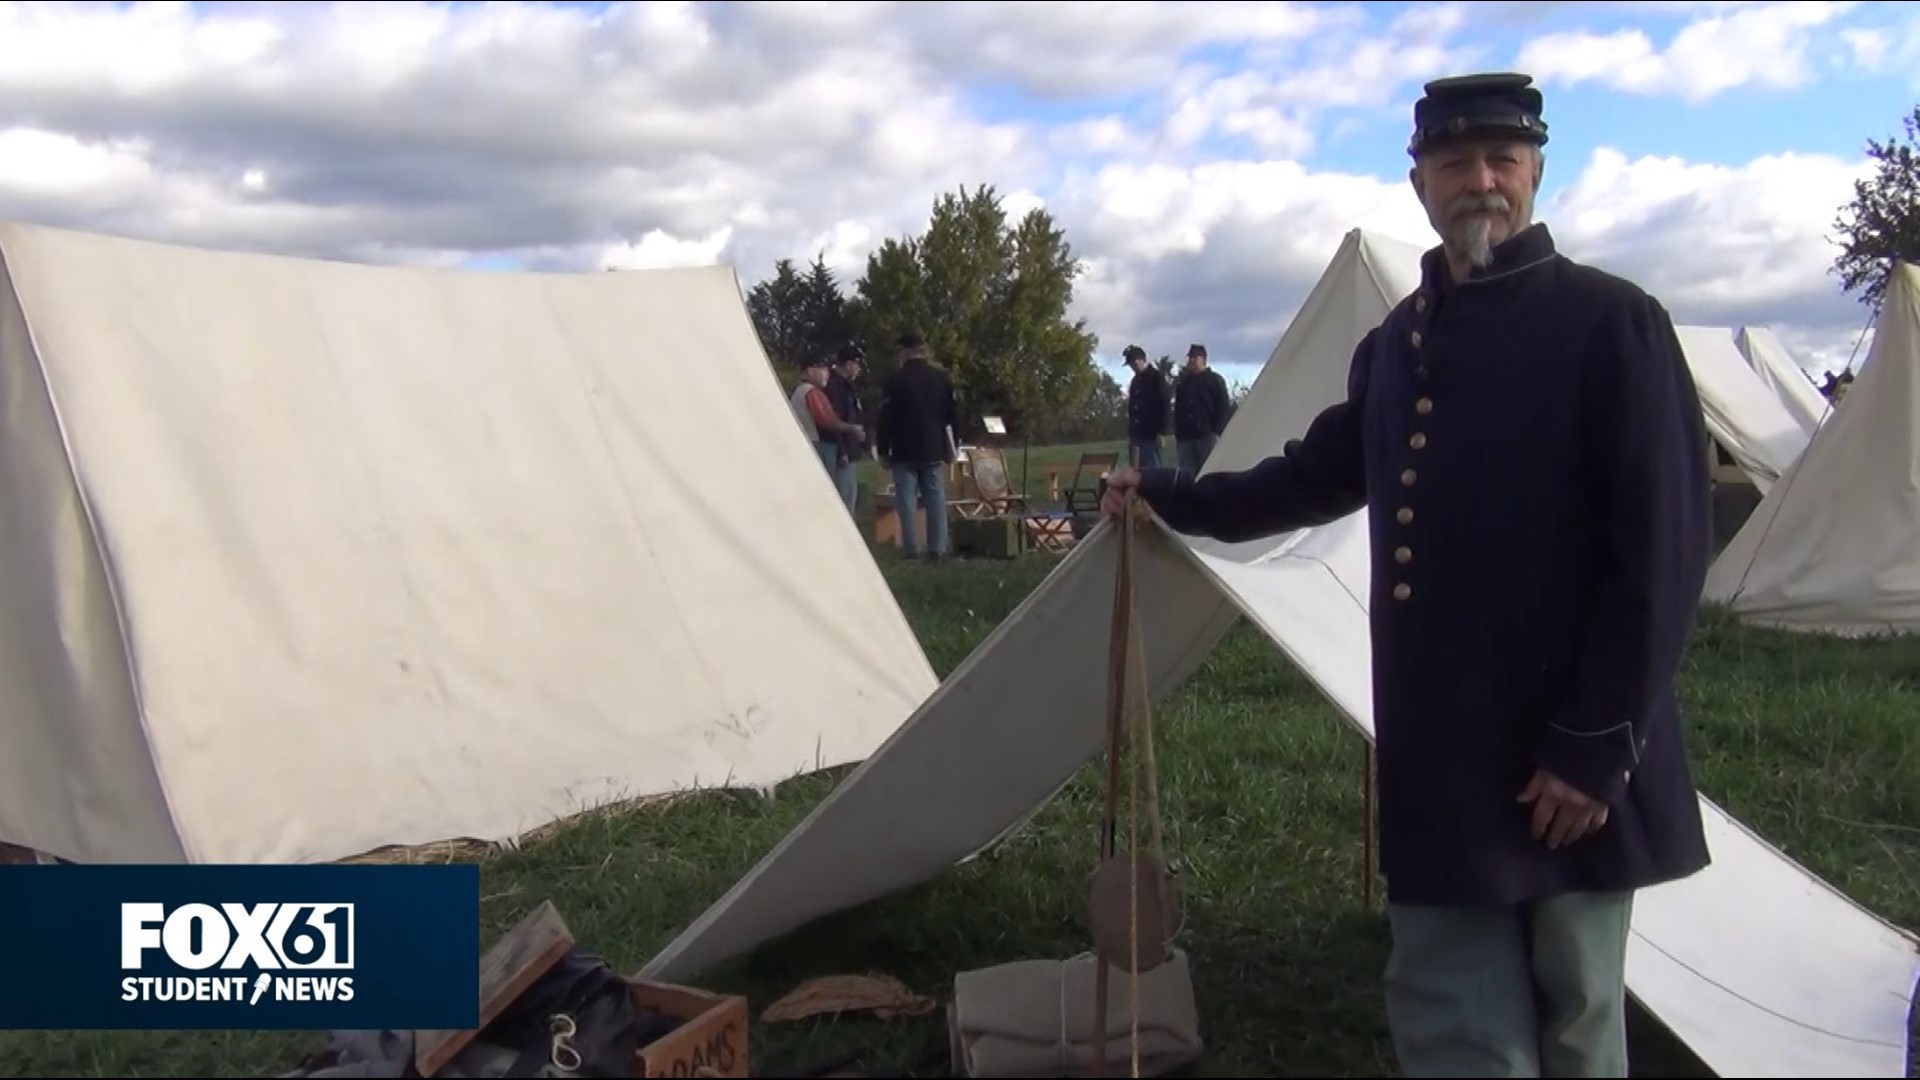 Civil War Reenactors come from all over the United States to portray real people that fought in the bloodiest war in American History.